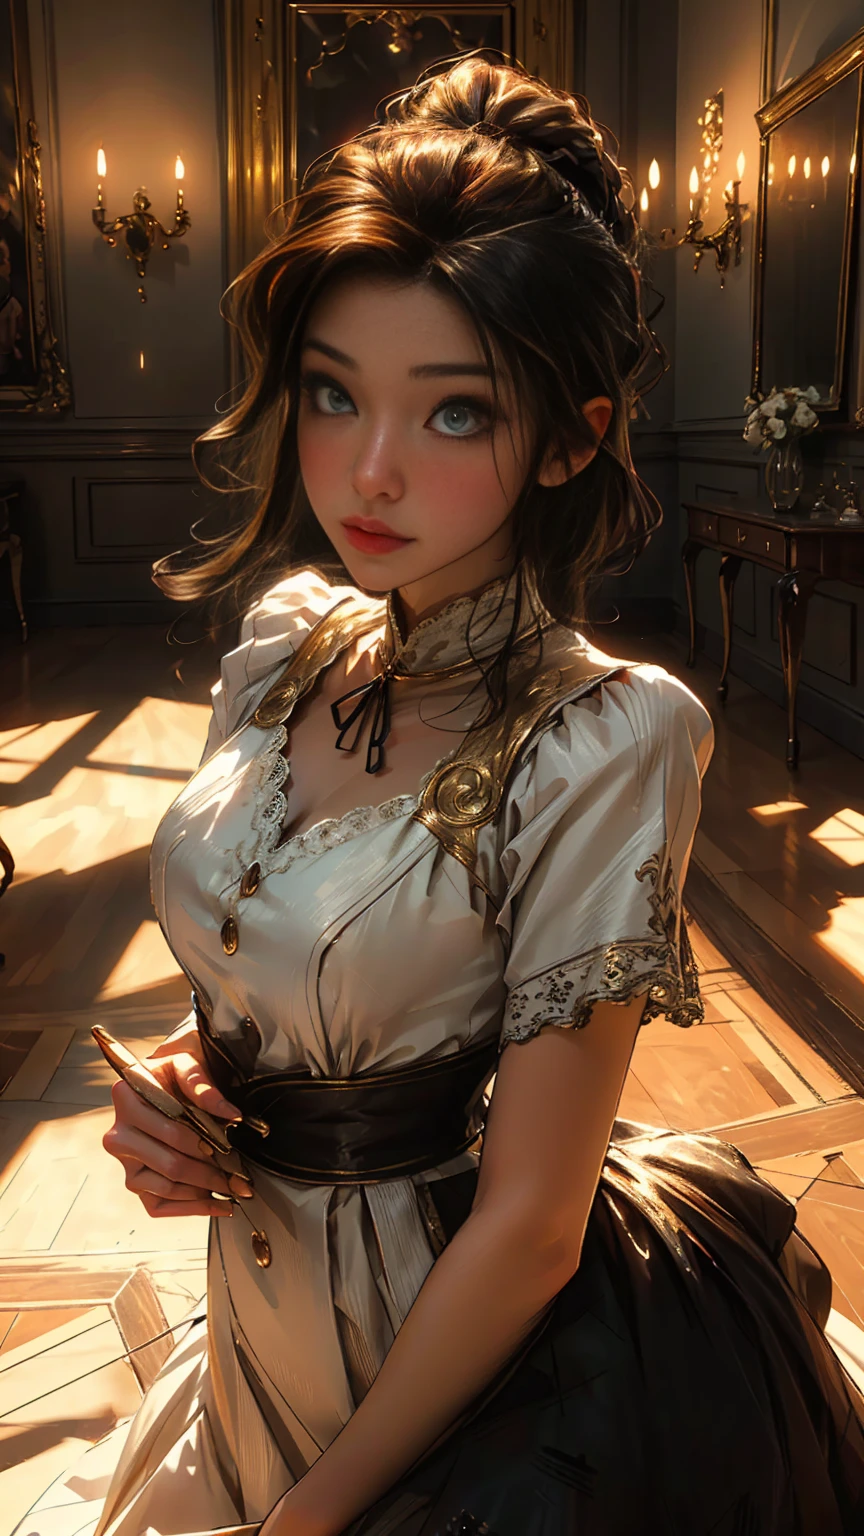 beautiful detailed maid girl,1950s style,elegant mansion interior,hyperdetailed,8k,high quality,ultra-realistic,realistic lighting,photorealistic,cinematic,highly detailed face and eyes,beautiful detailed dress,intricate details,chiaroscuro lighting,dramatic shadows,warm color tones,golden hour lighting,ornate decor,luxurious furniture,parquet floors